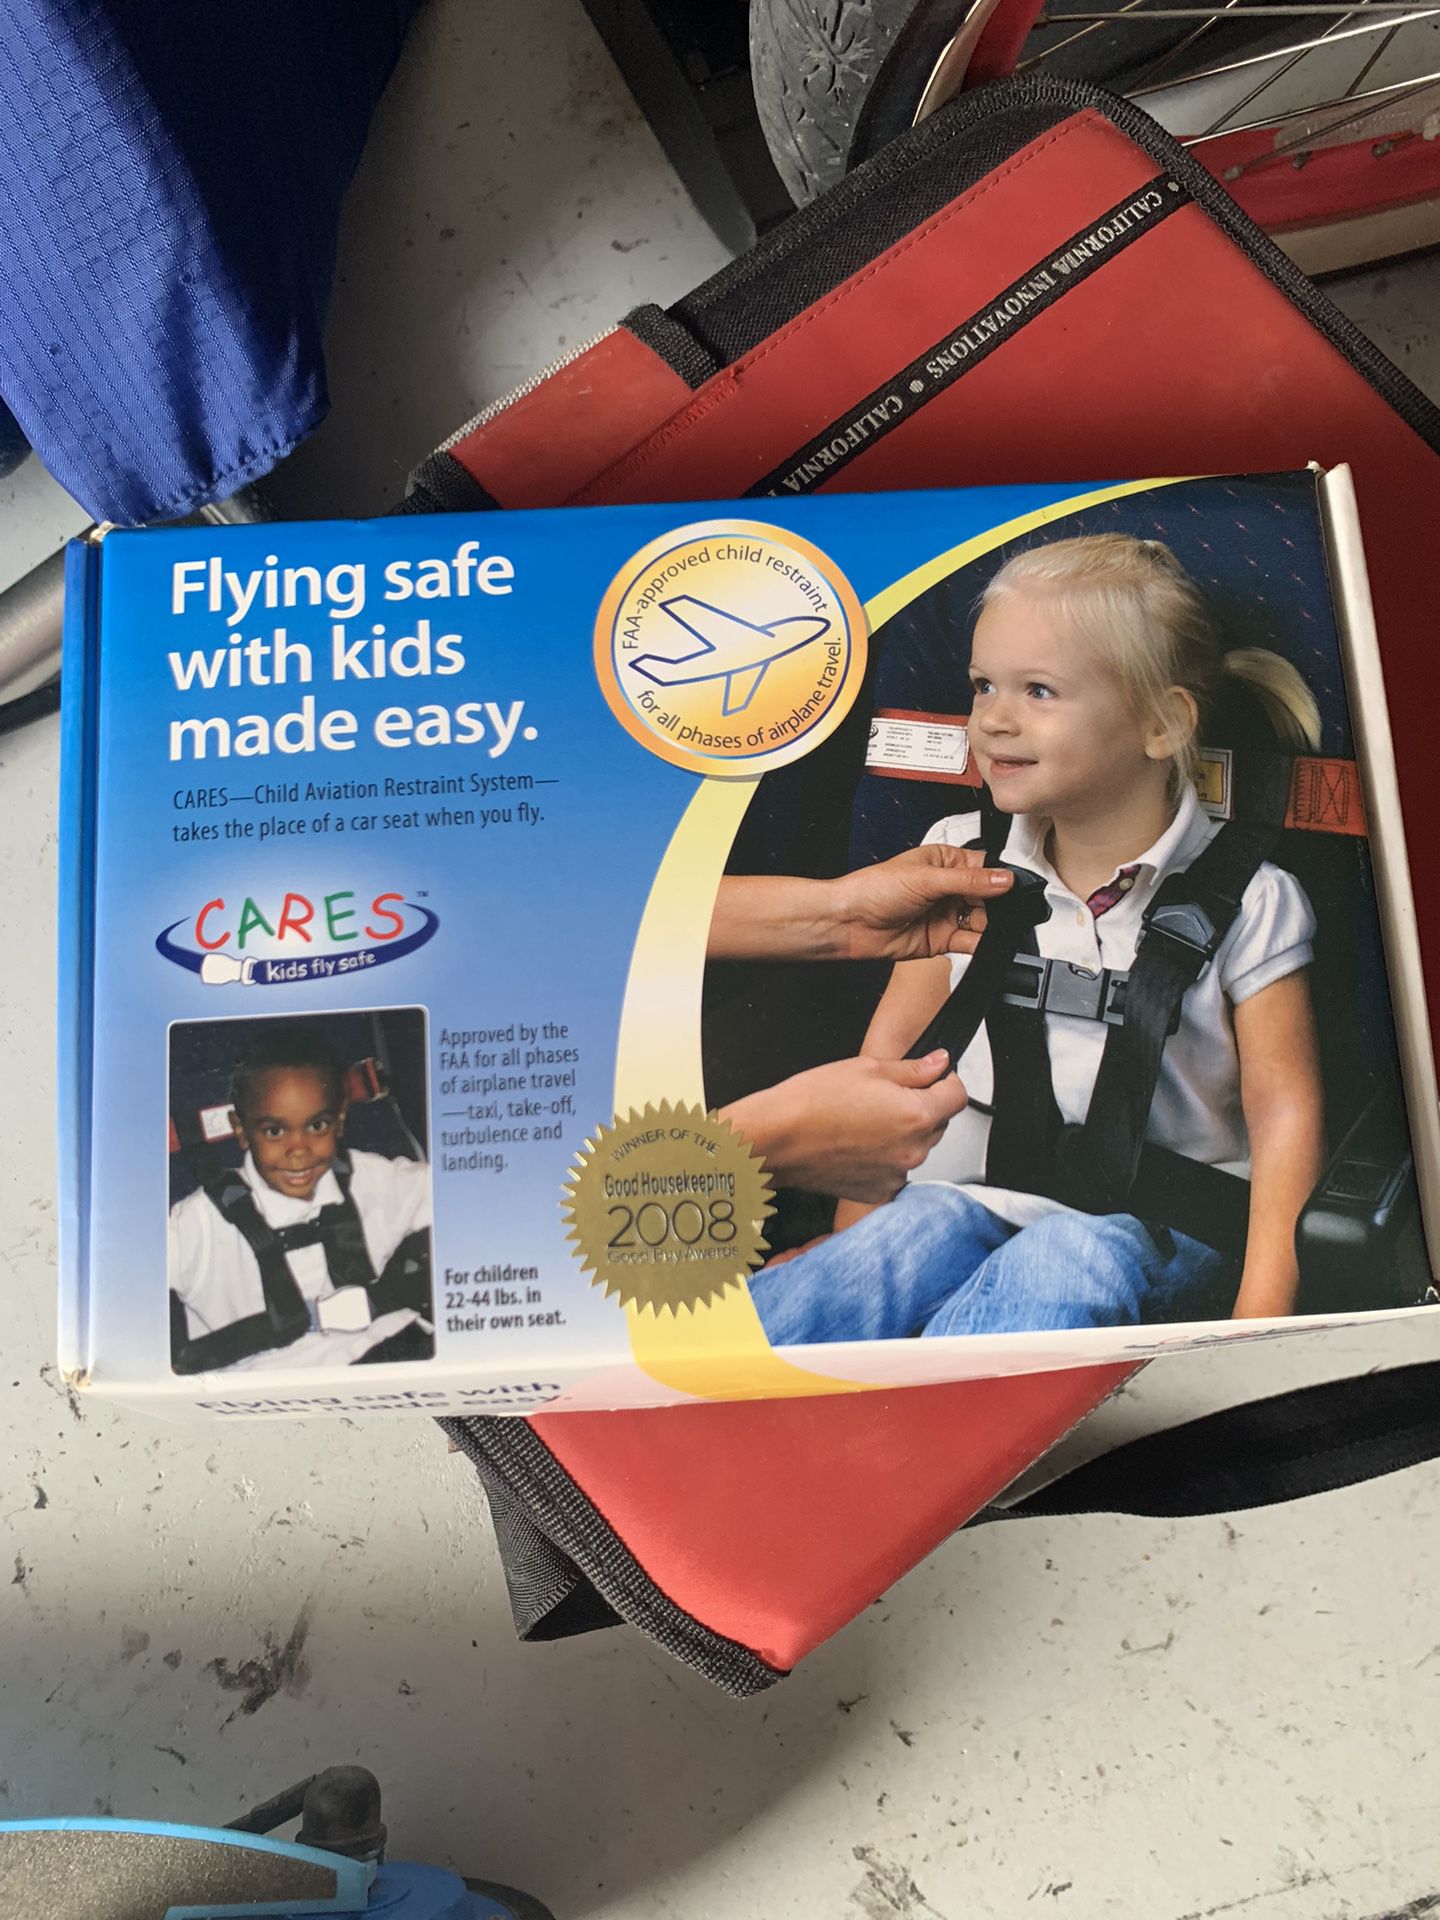 Flying safe with kids made easy.